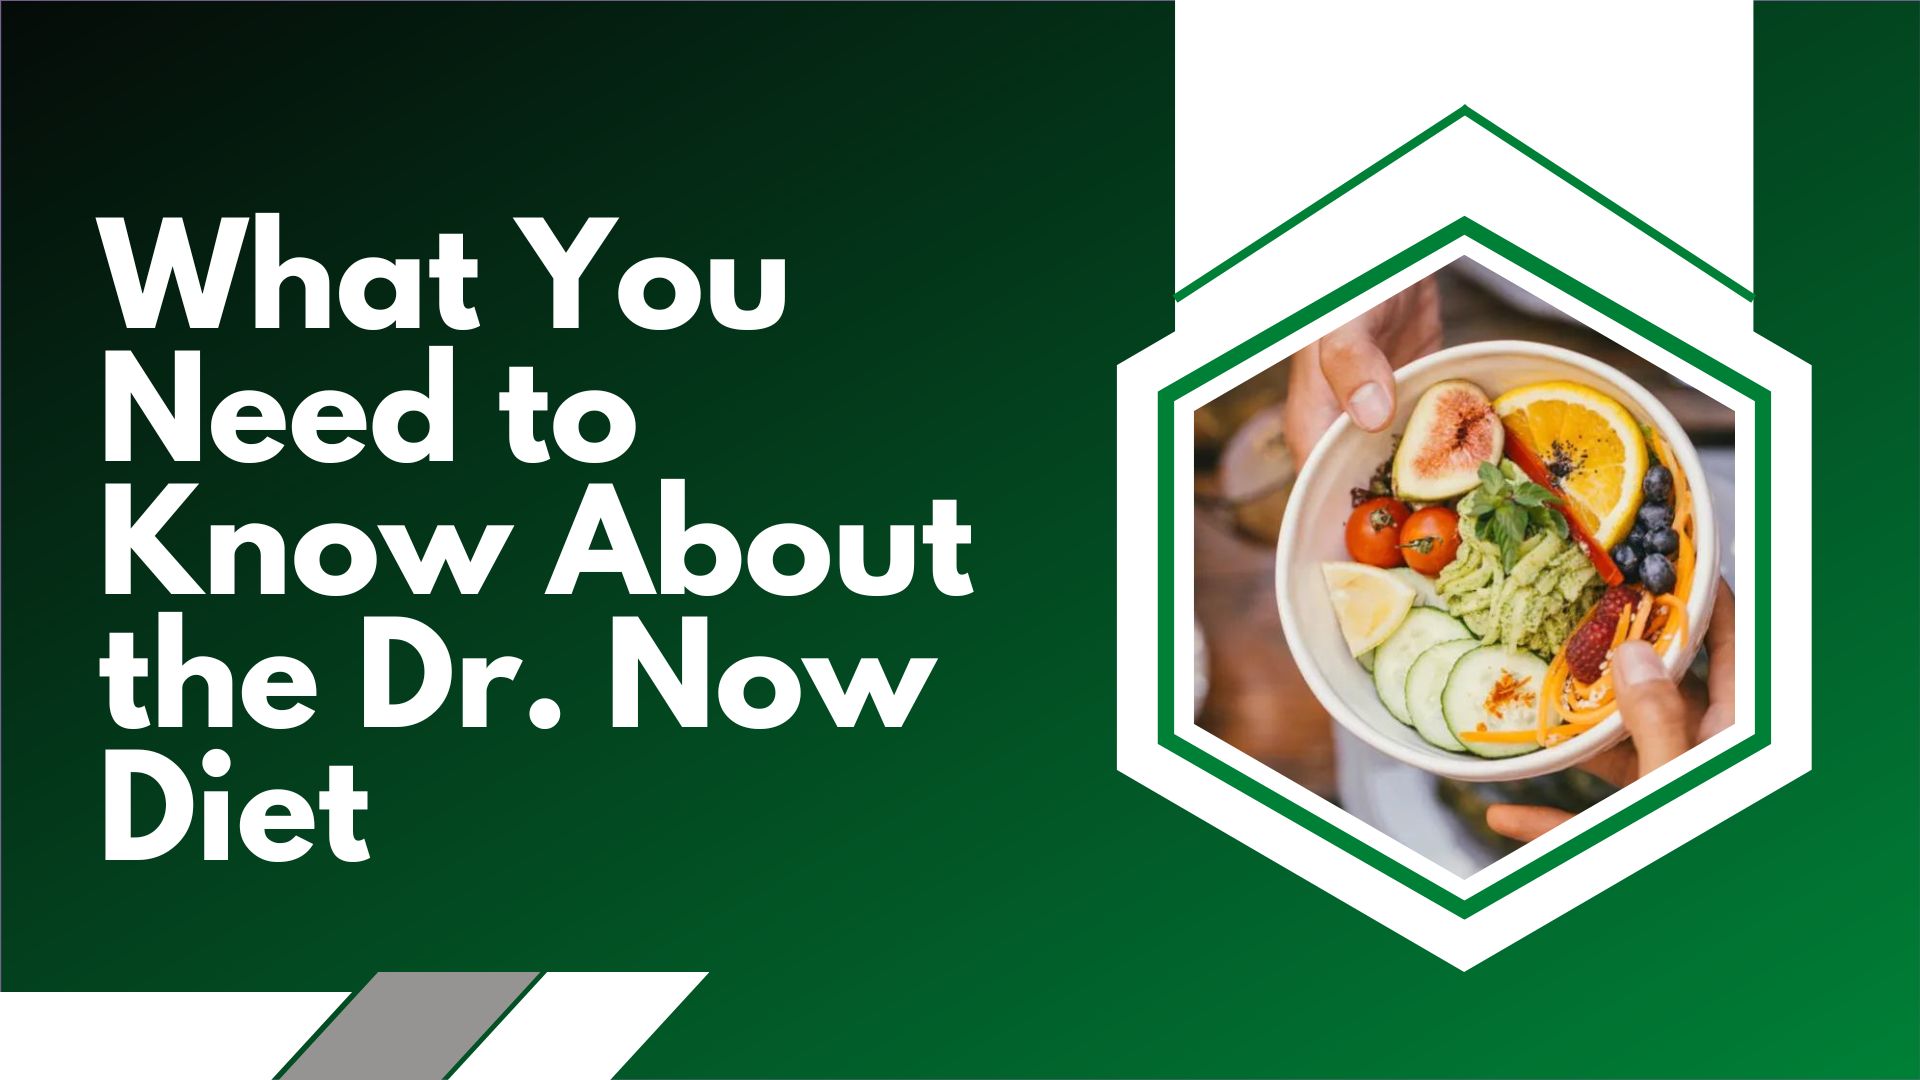 What You Need to Know About the Dr. Now Diet